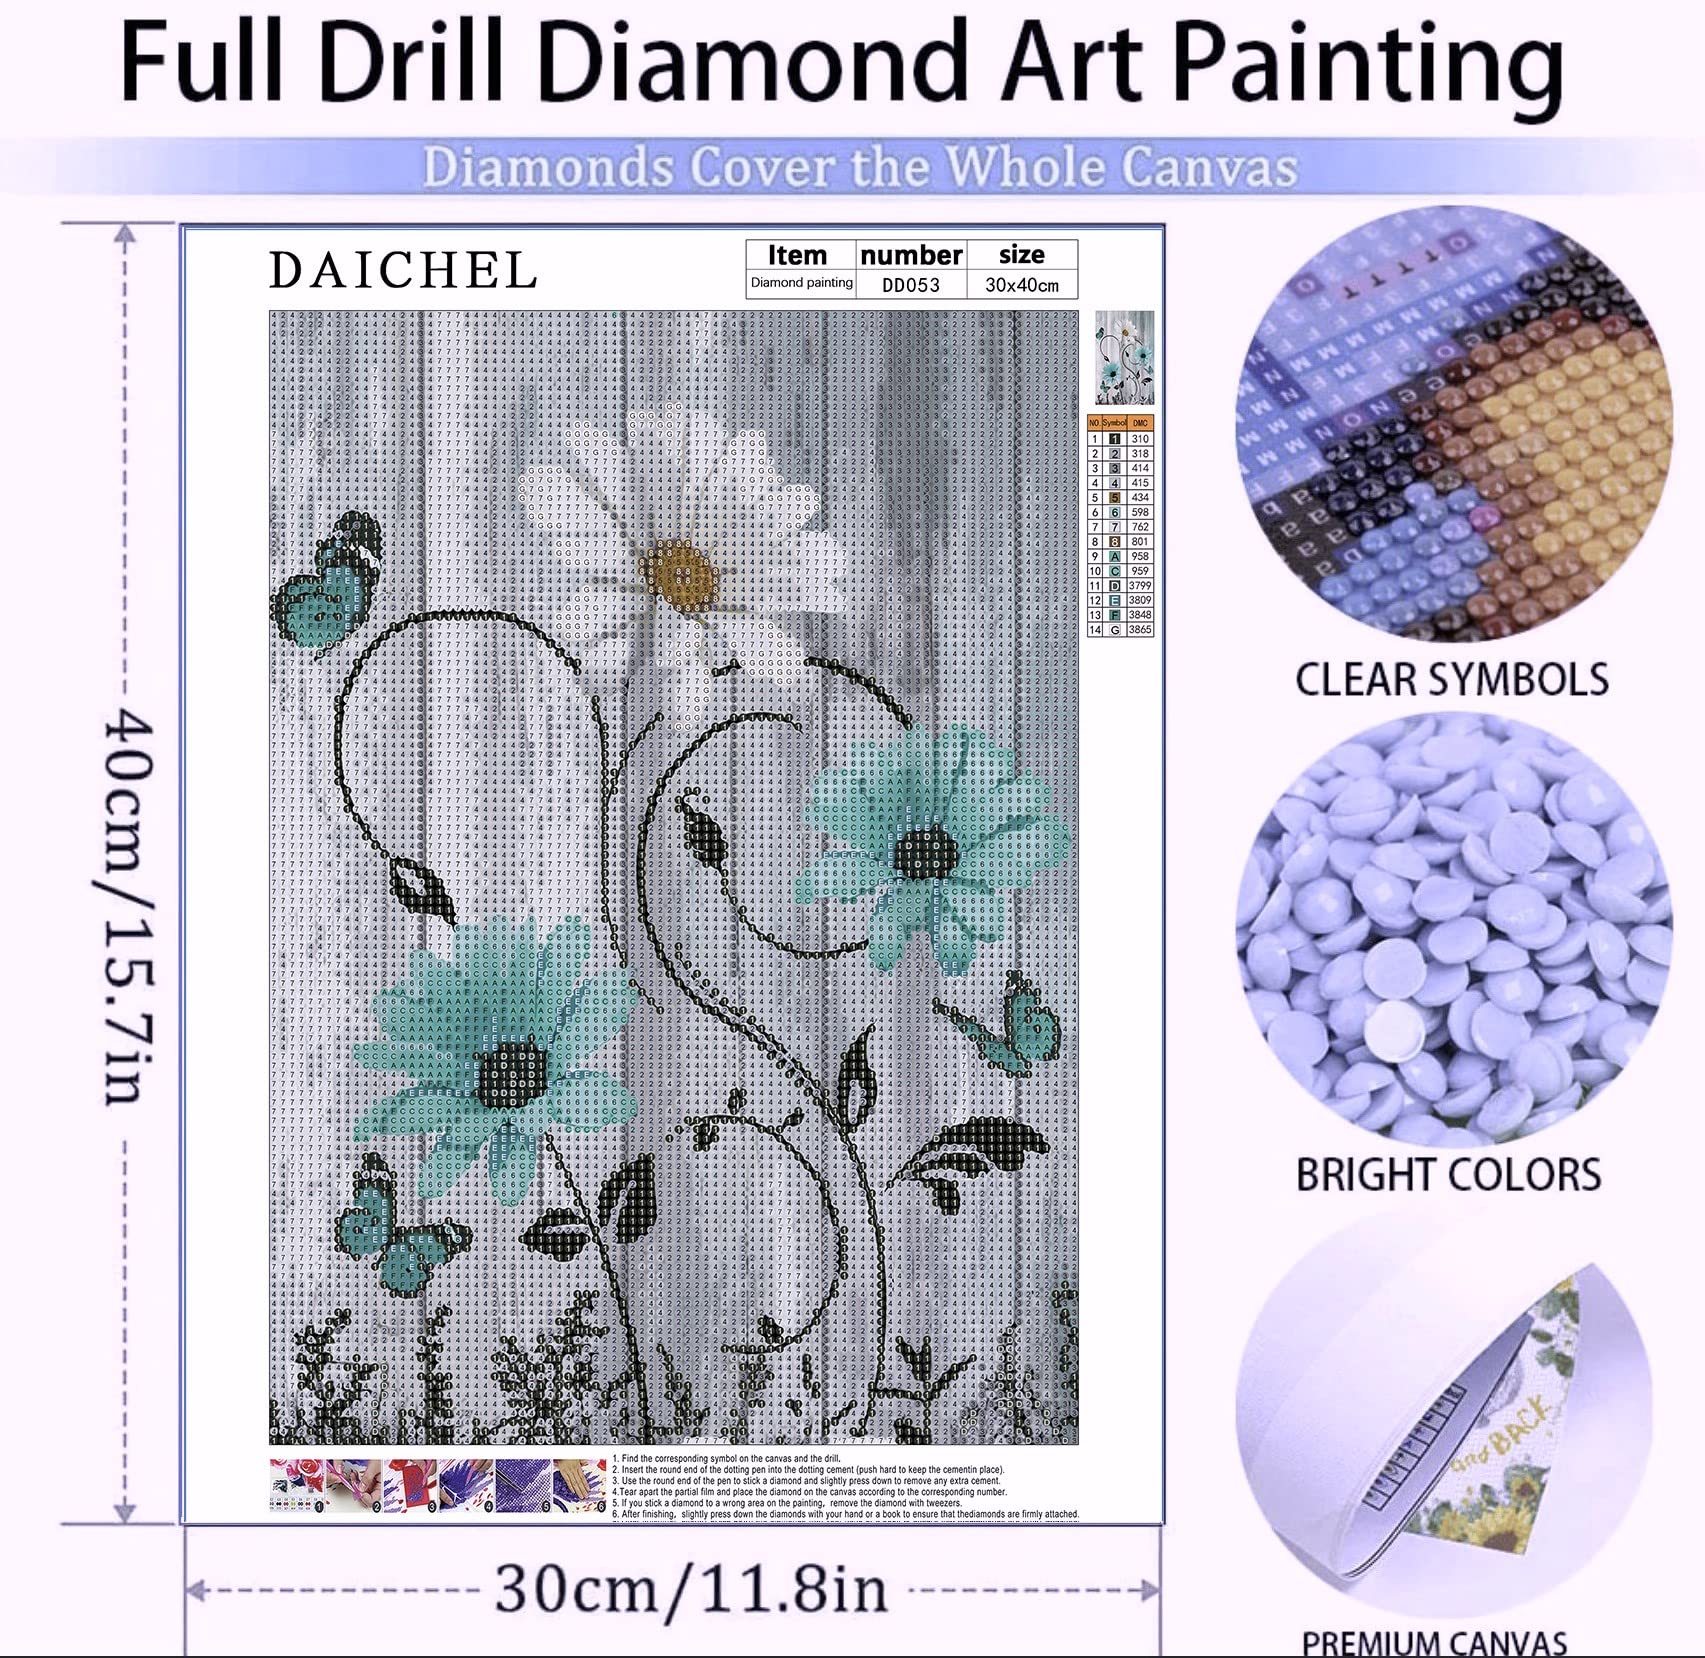 Daisy Flower Diamond Art Painting Kits for Adults - Full Drill Diamond Dots Paintings for Beginners, Round 5D Paint with Diamonds Pictures Gem Art Painting Kits DIY Adult Crafts Kits 12x16inch